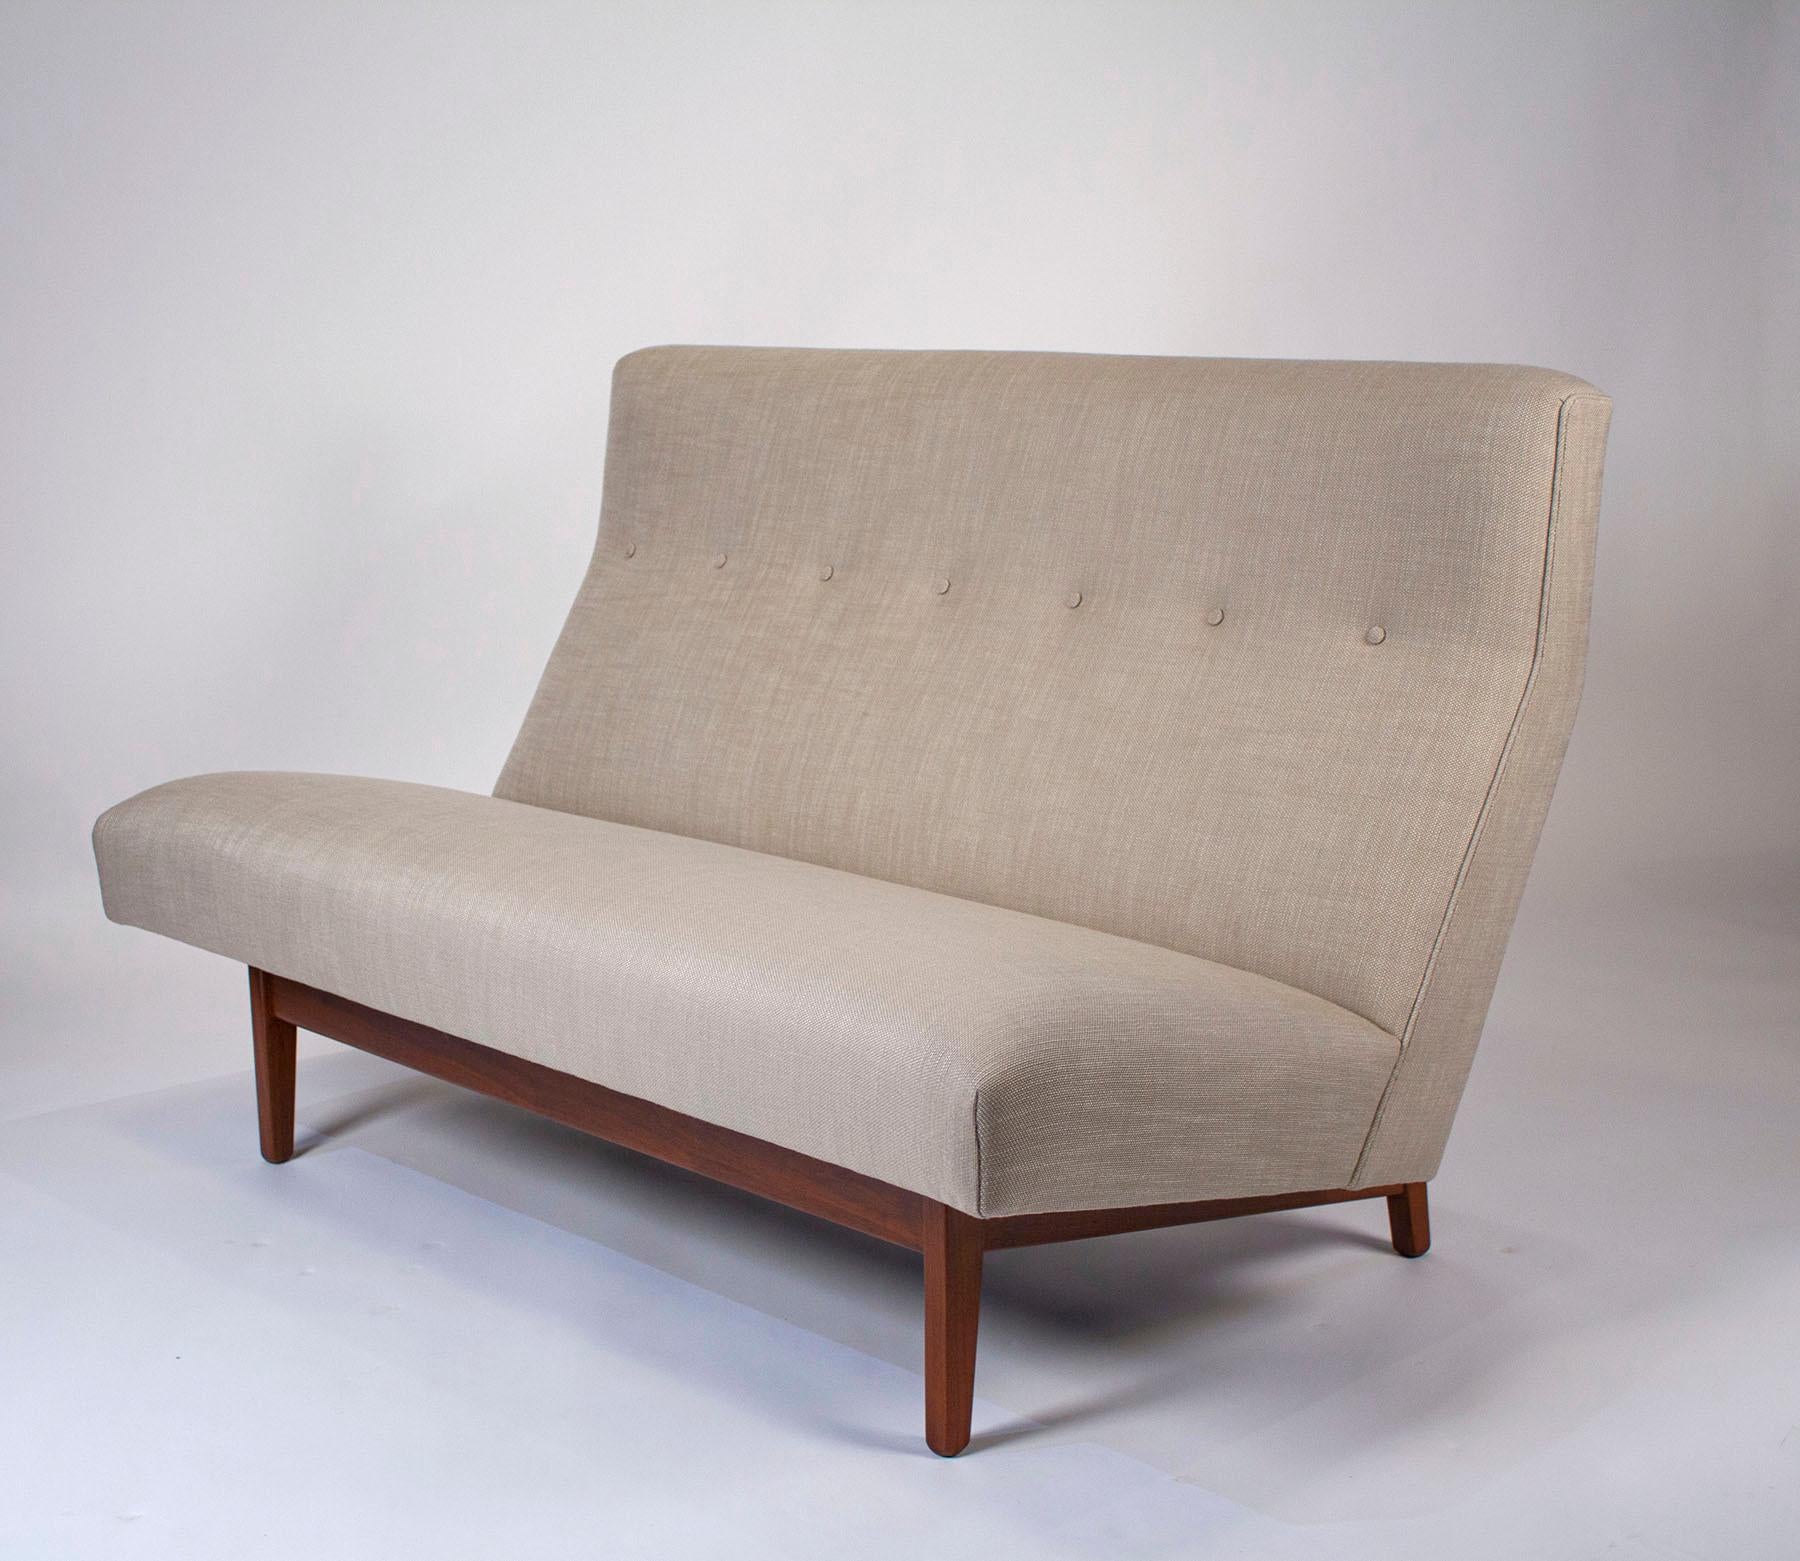 Jens Risom Armless Settee in Walnut Cradle Frames with Linen Upholstery 1